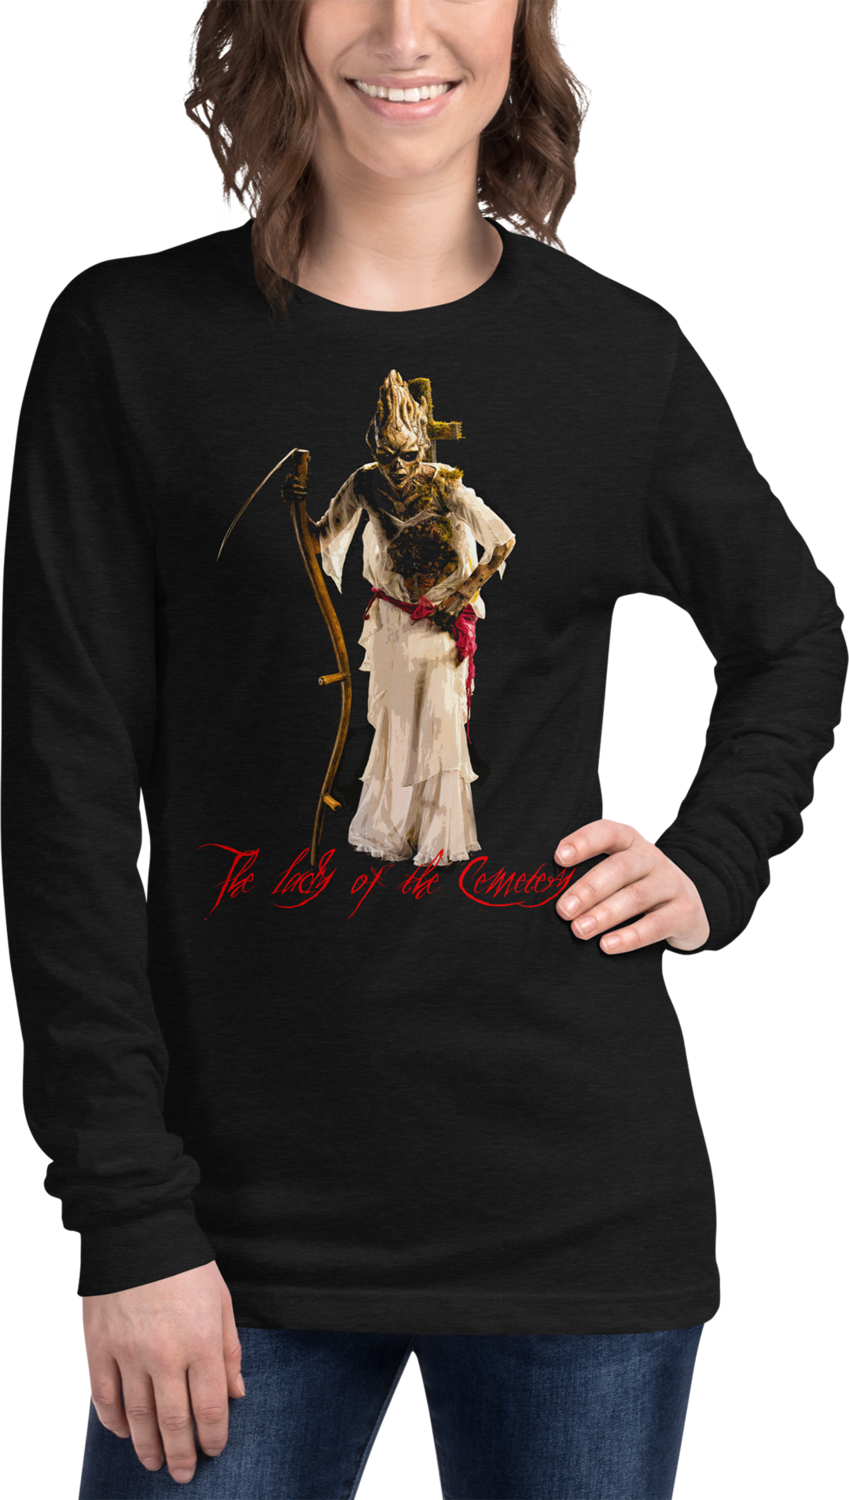 From NETFLIX-Lady Of The Cemetery Face Off Unisex Long Sleeve Shirt